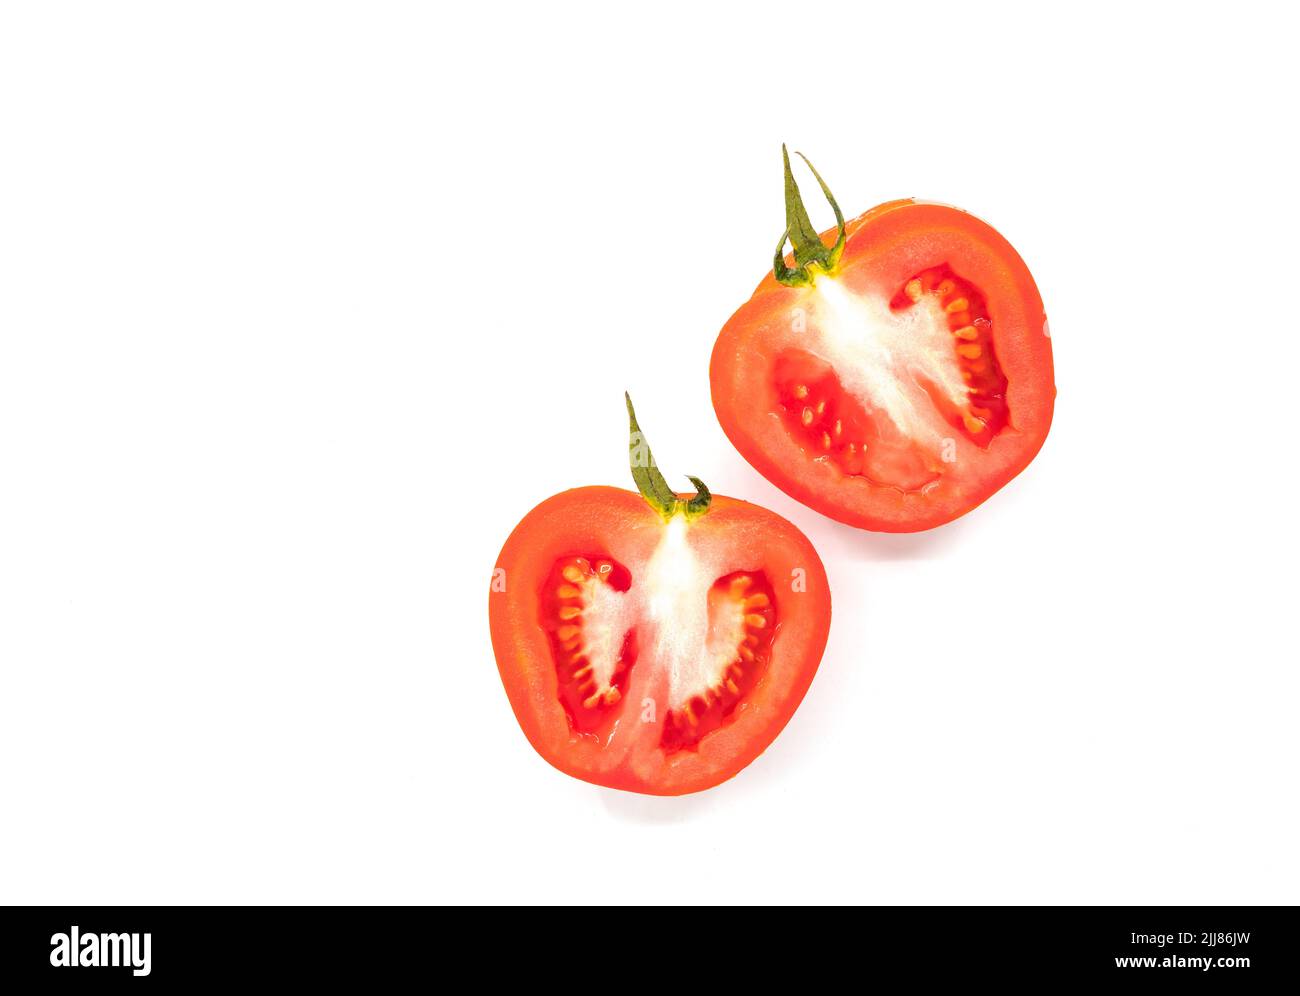 Isolated cut-half of red tomato on white background, fresh two half-cut tomatoes. Stock Photo